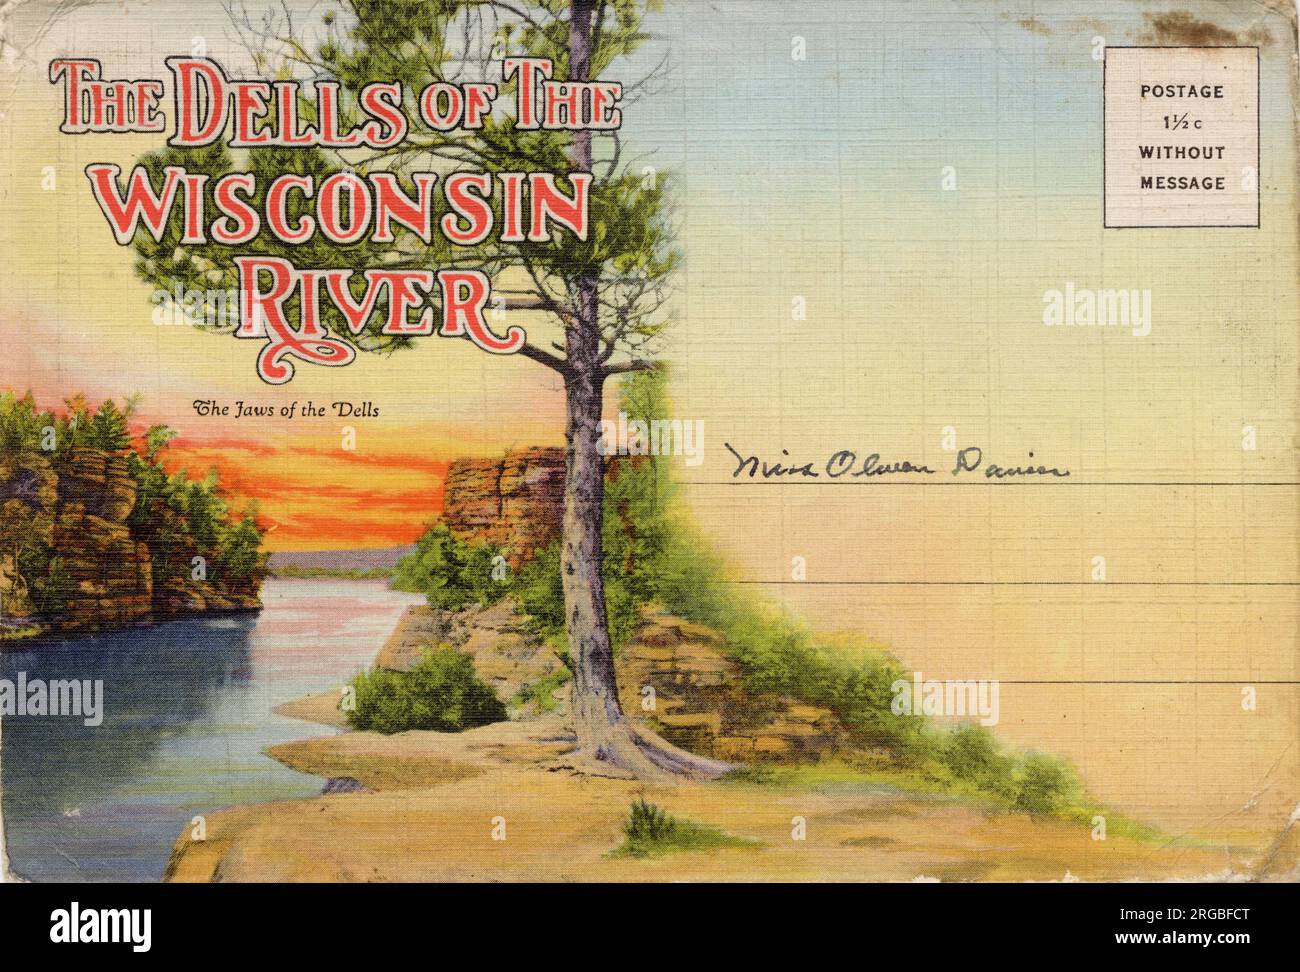 The Dells of the Wisconsin River, Wisconsin, États-Unis Banque D'Images